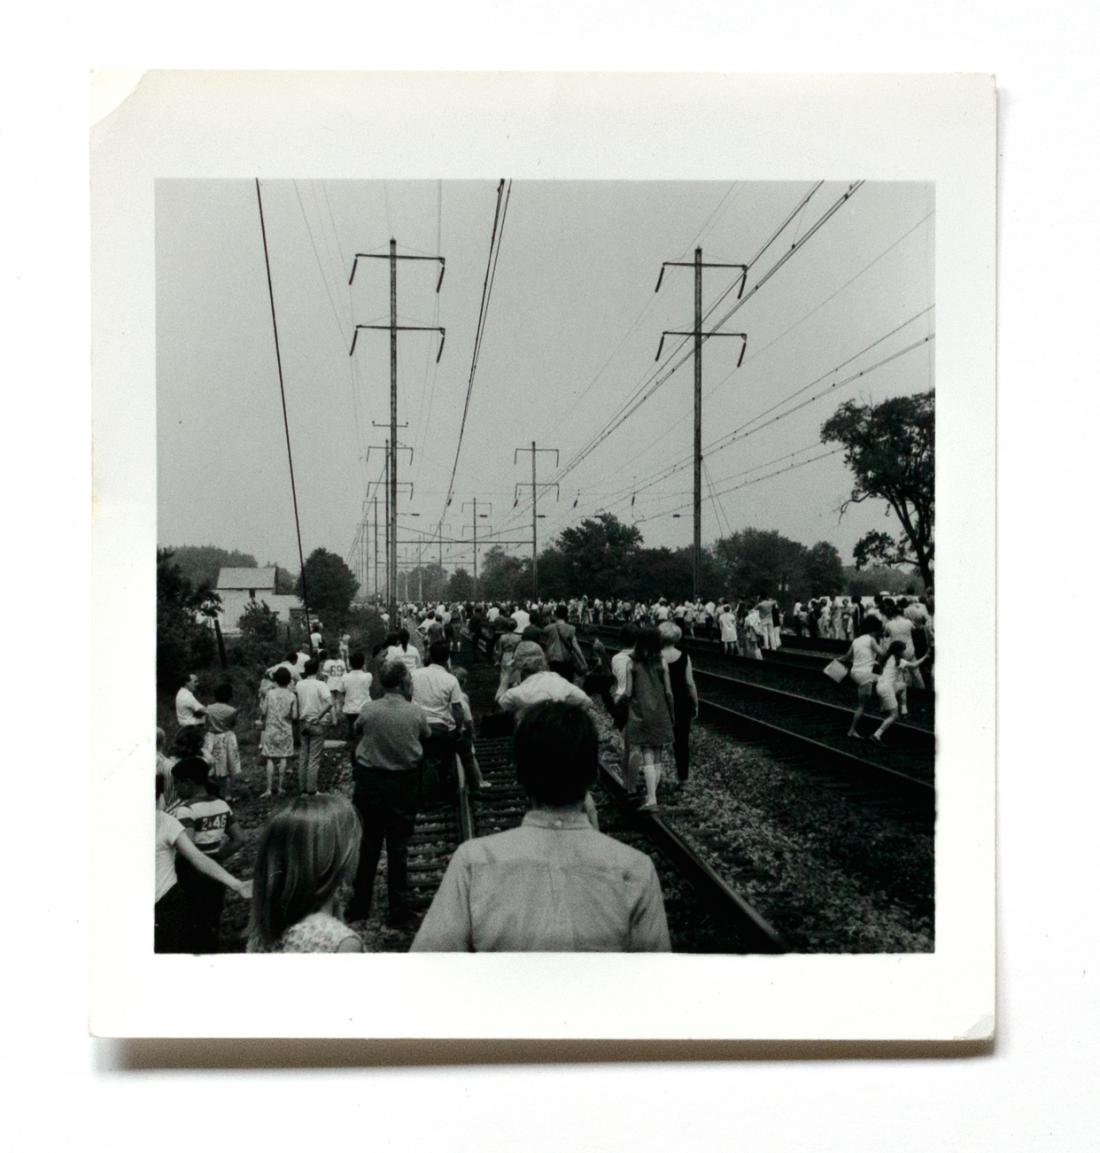 Claire Leary, [Iselin, New Jersey], June 8, 1968. From Rein Jelle Terpstra’s The People’s View